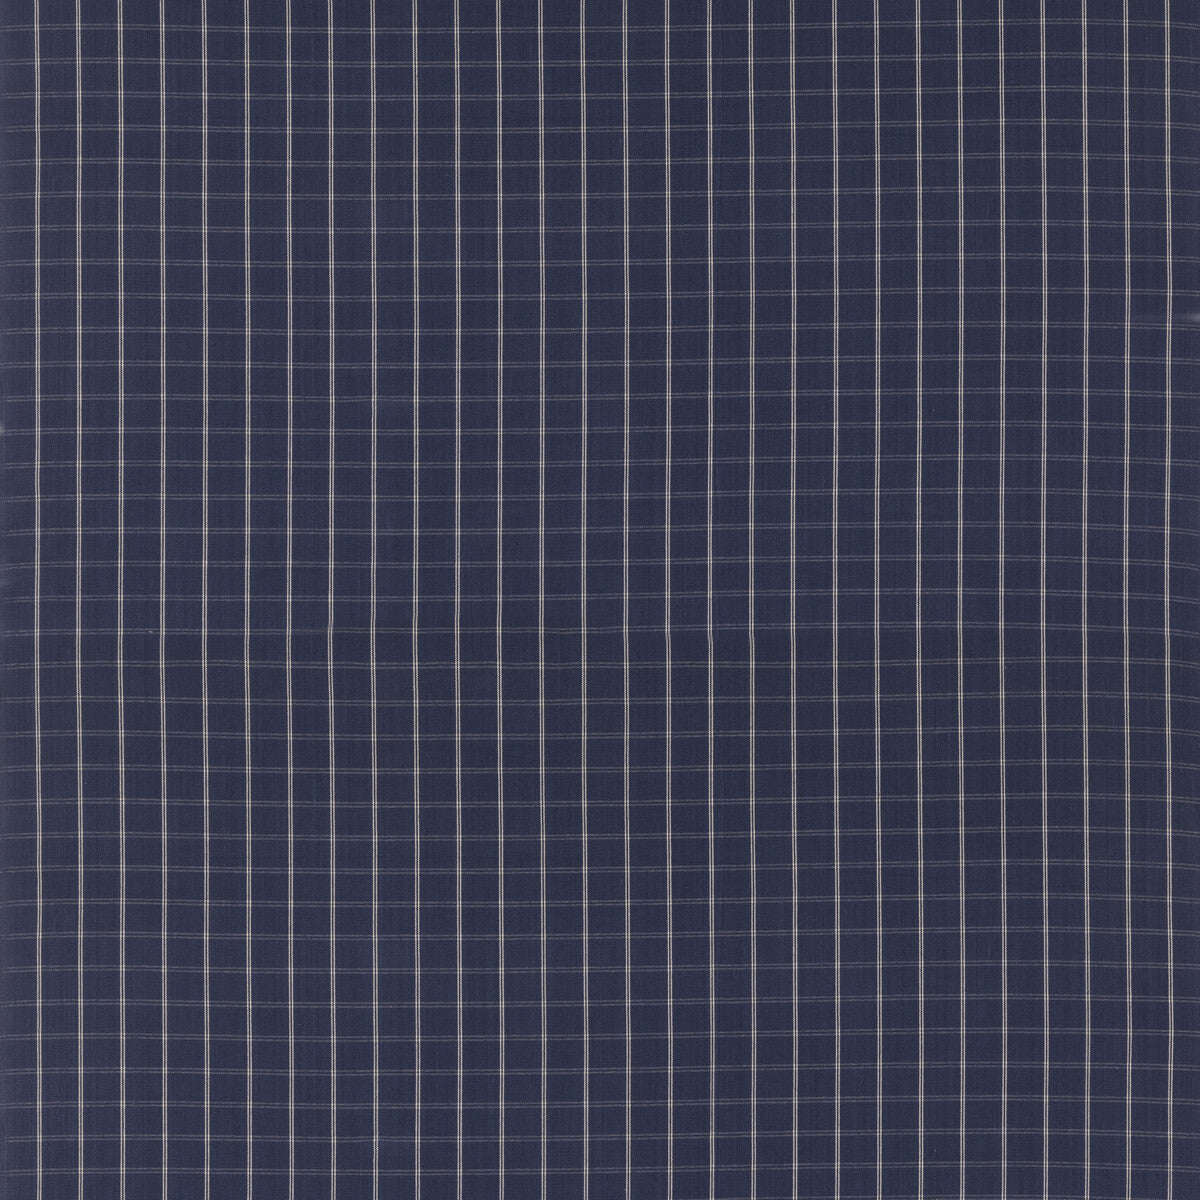 Compass Check fabric in indigo color - pattern FD816.H10.0 - by Mulberry in the Westerly Stripes collection